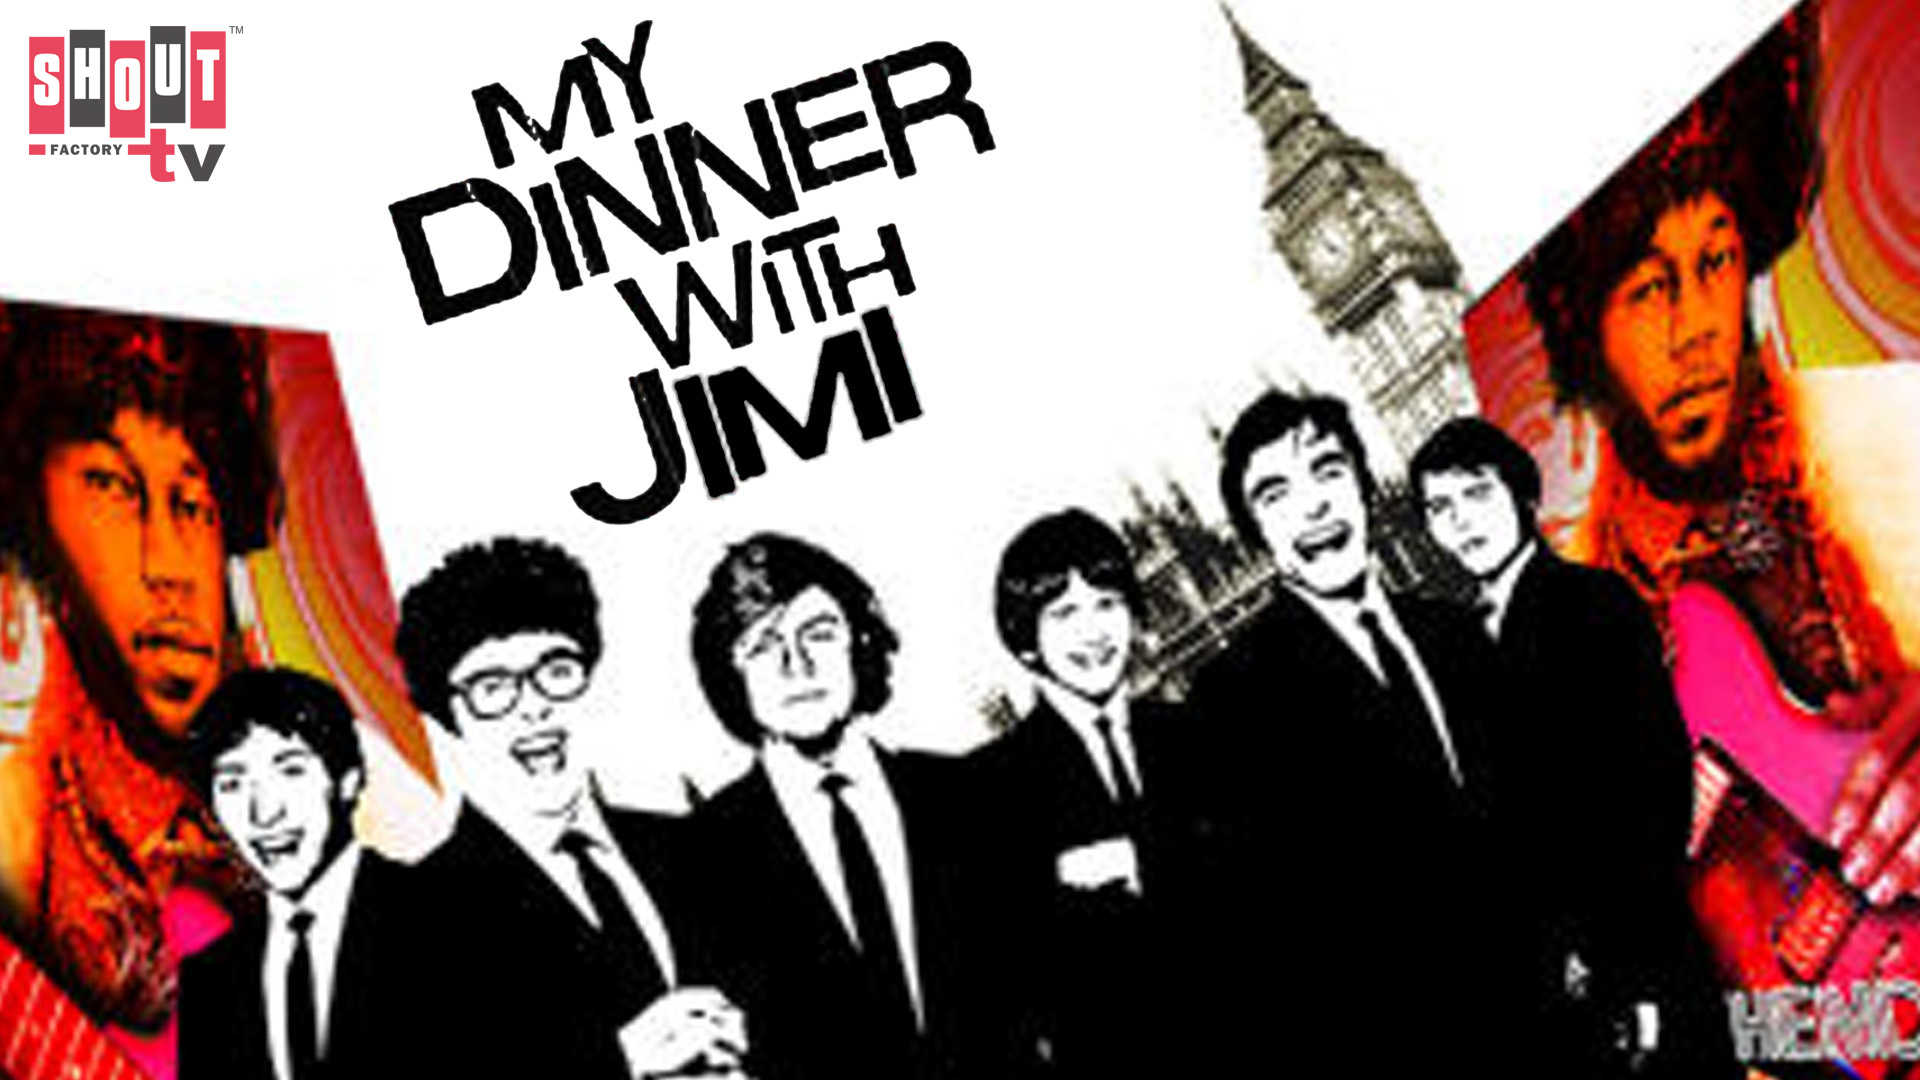 My Dinner With Jimi